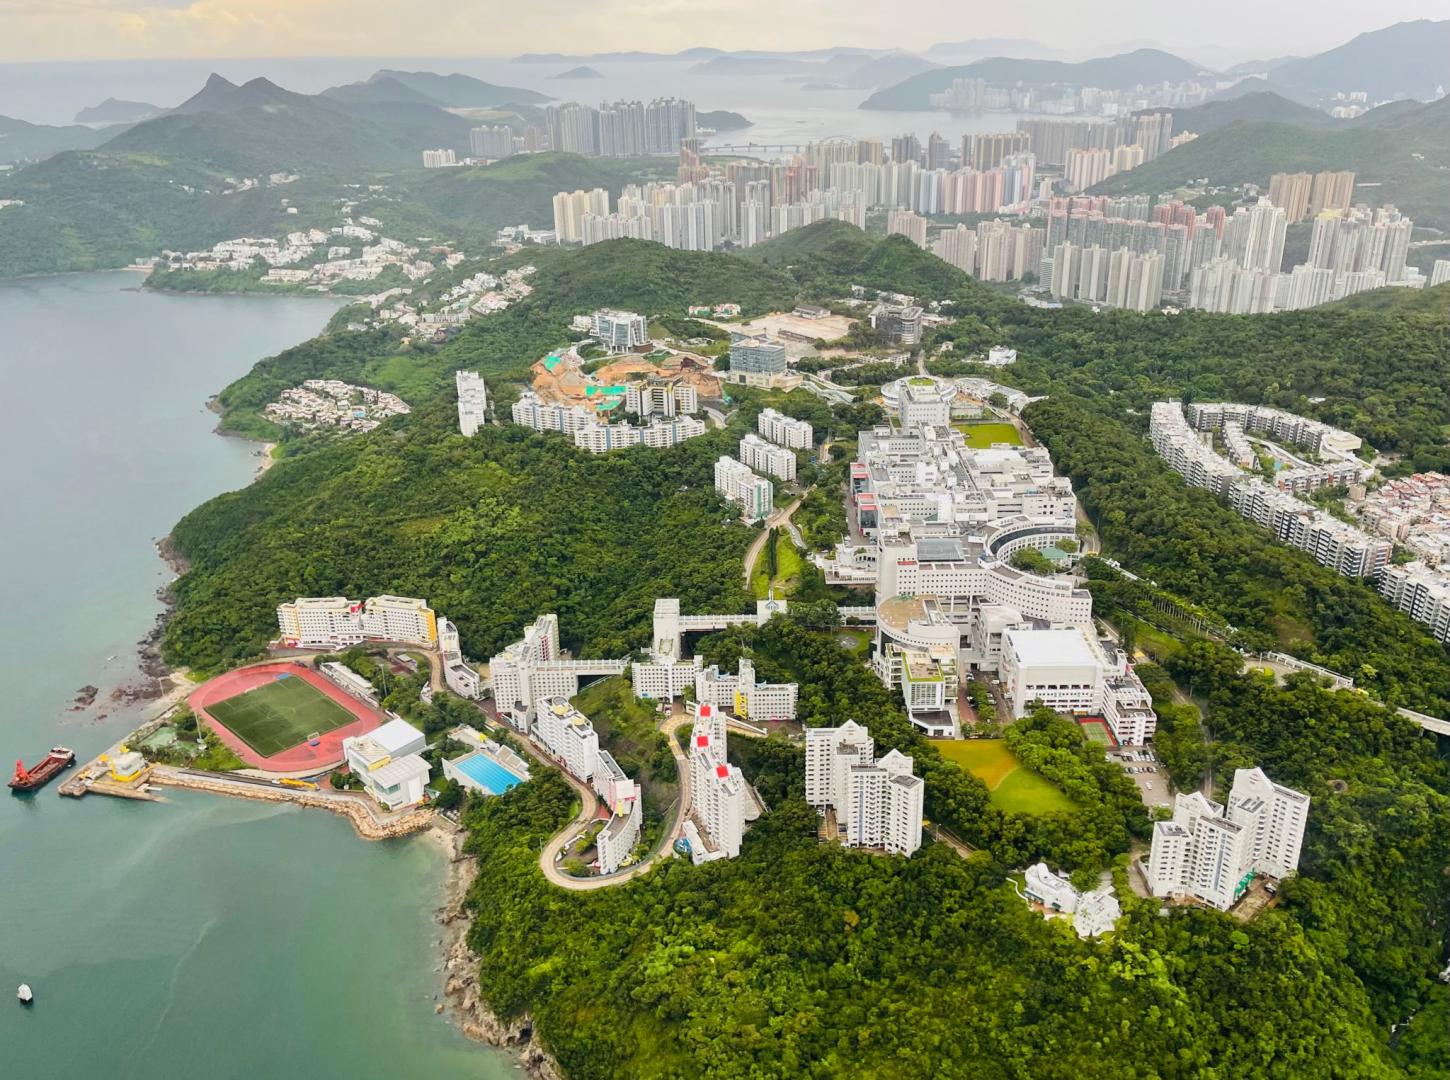 Helicopter flies over HKUST campus at Clear Water Bay.